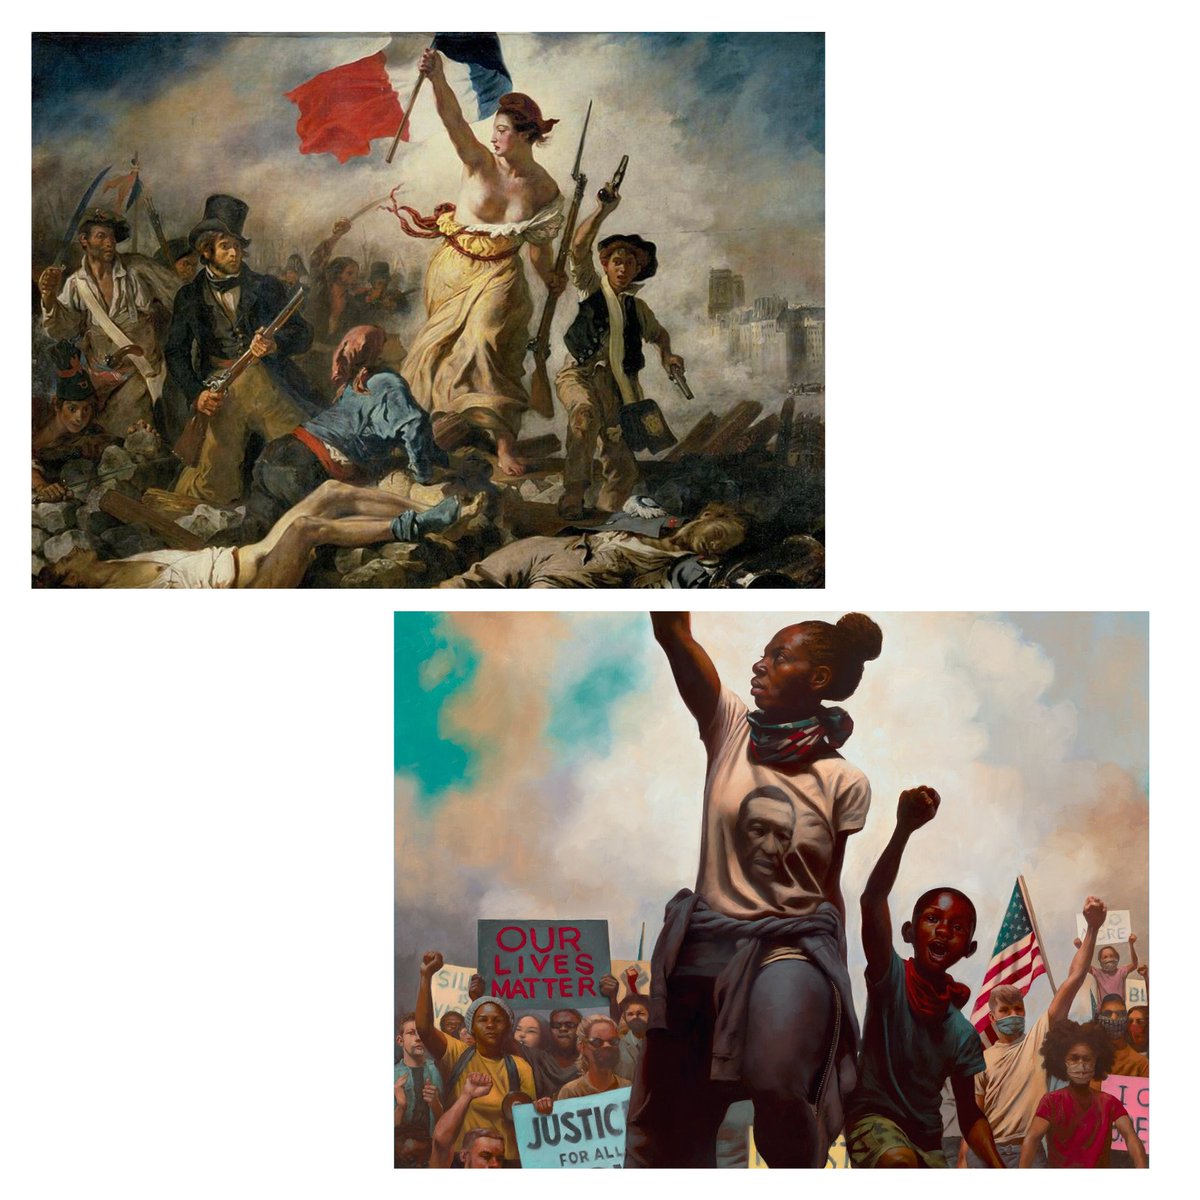 2/Nelson's reproduction treats his 'Liberty' as a lone warrior, no husband, father, worker or adult son to protect her. The nearest person is her son. If she is to be the new manifestation of Columbia, under whom all Americans are equal, she is UNPROTECTED, easily maimed+killed